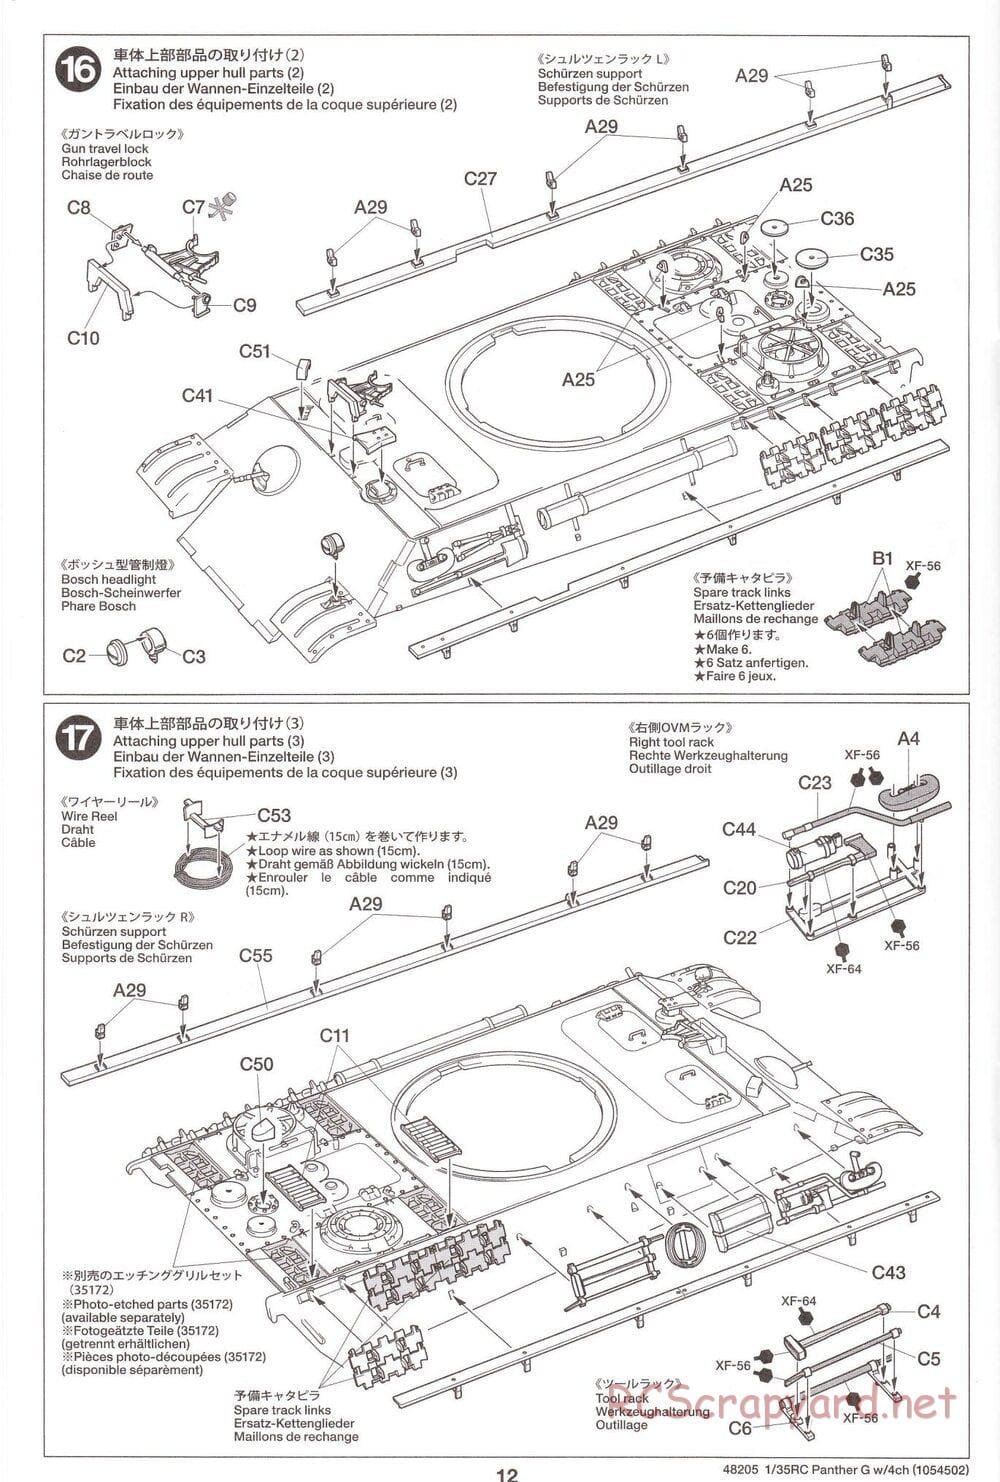 Tamiya - German Panther Type G - 1/35 Scale Chassis - Manual - Page 12